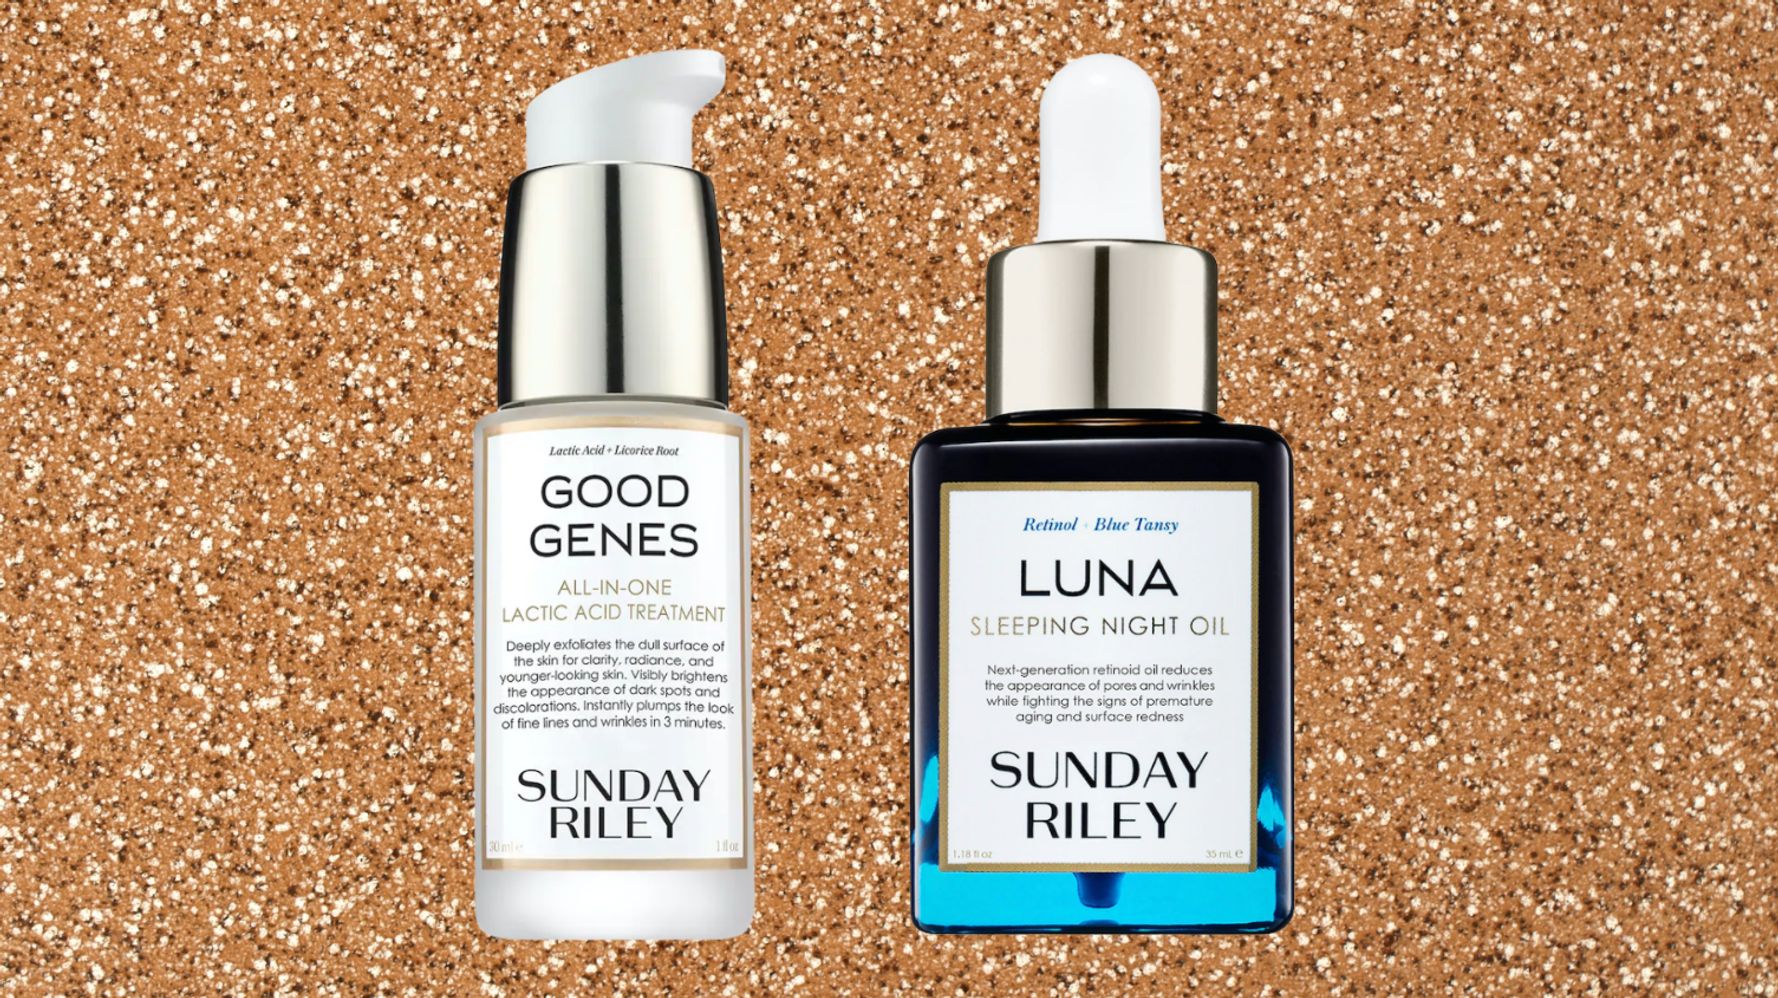 I Regret To Inform You That This Sunday Riley Skin Care Duo Could Transform Your Complexion